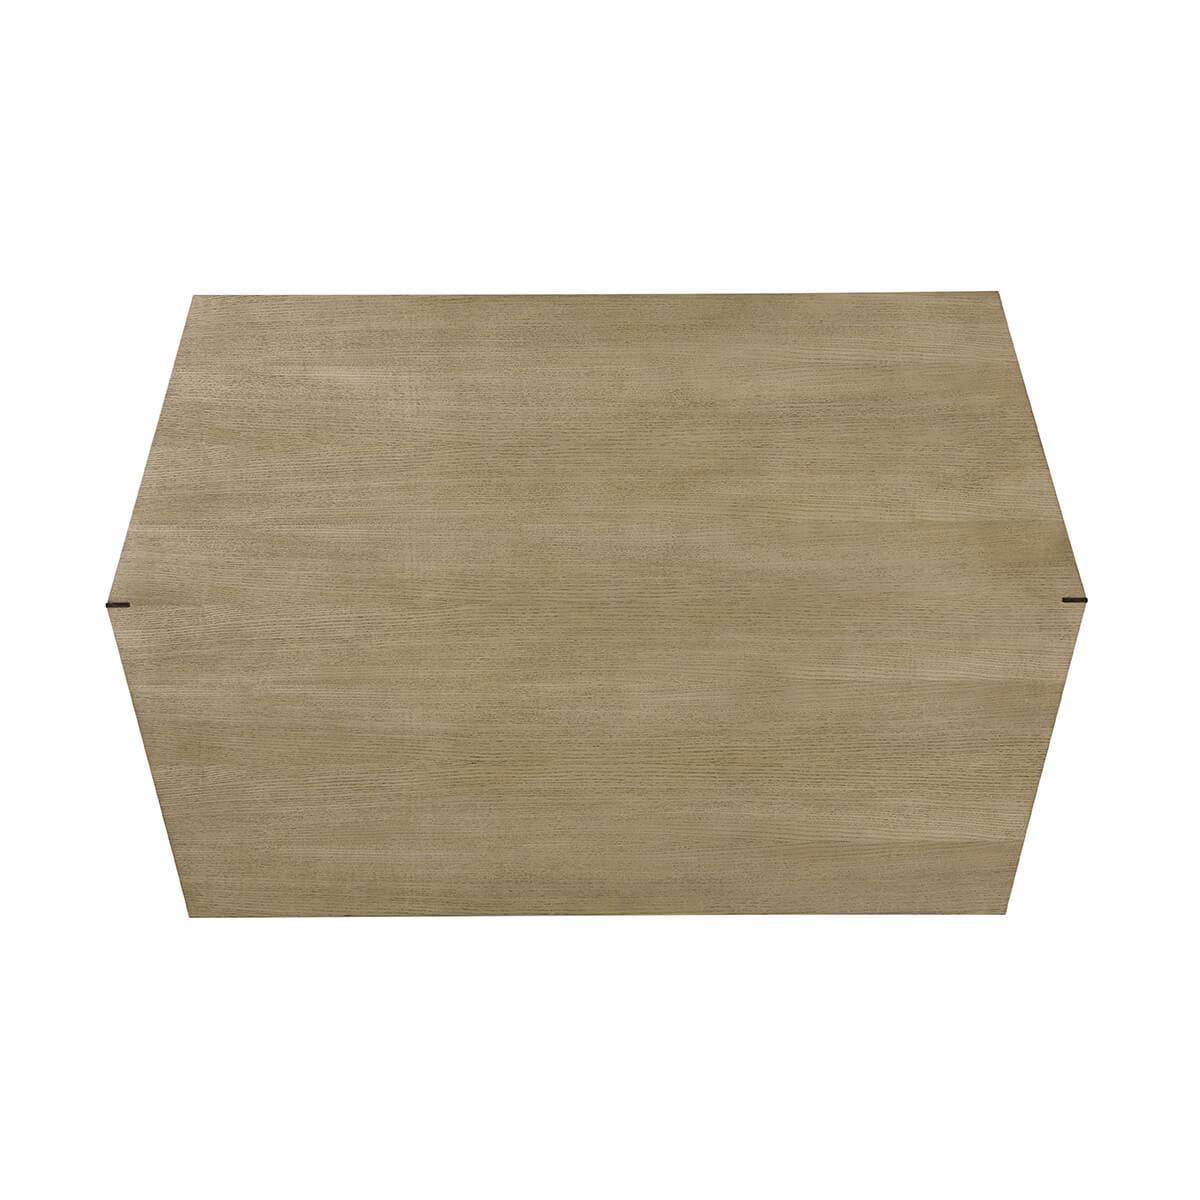 features a contemporary design with faceted planes reminiscent of the simple complexity of origami art. Veneered in Ash, featured in our natural Dune finish, outlined with brass detailing.
Dimensions: 58.5